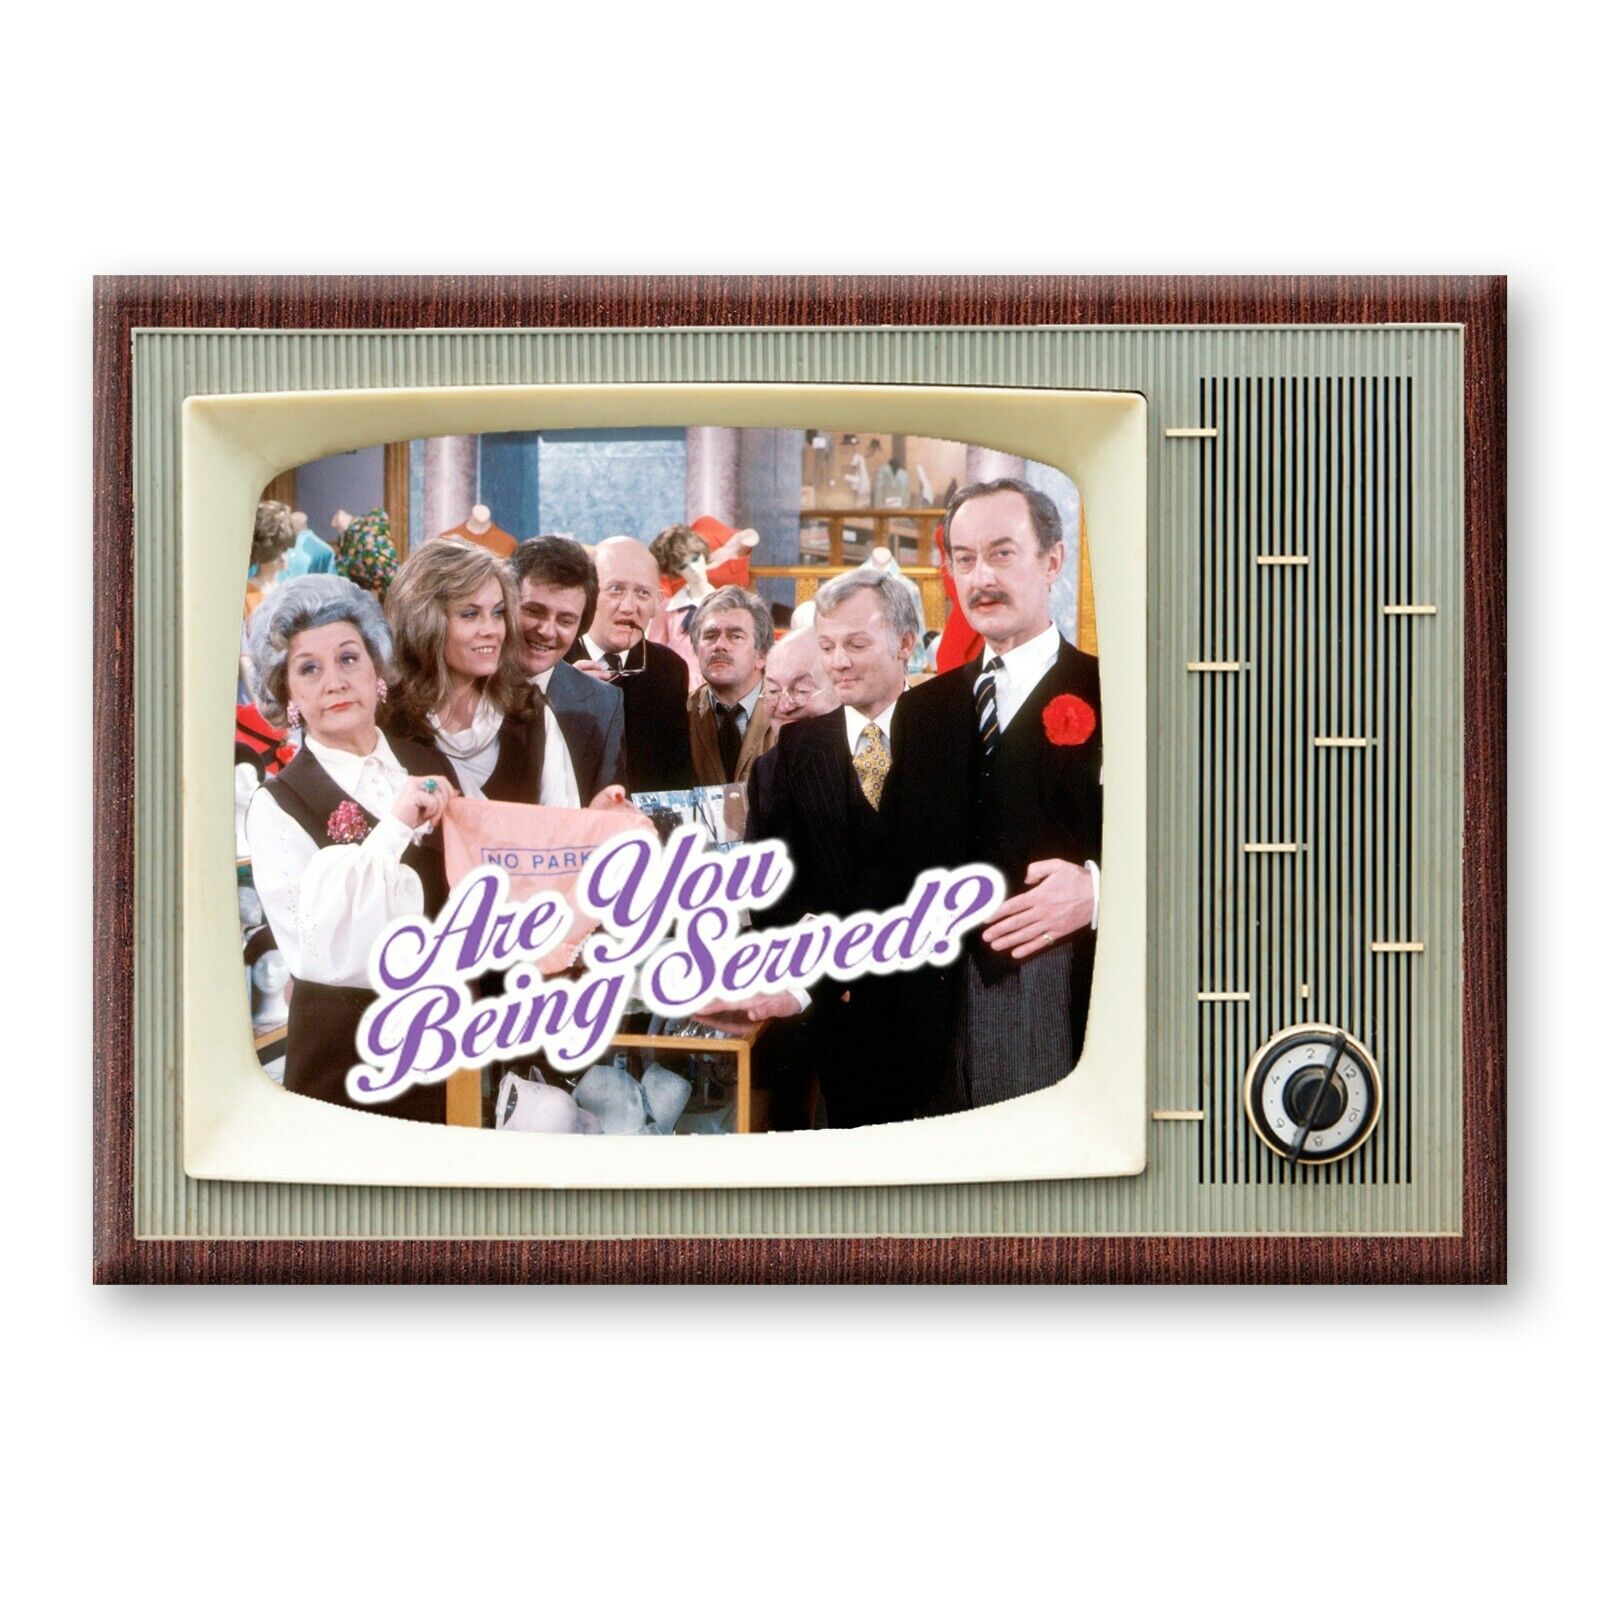 ARE YOU BEING SERVED? TV Show Classic TV 3.5 inches x 2.5 inches FRIDGE MAGNET